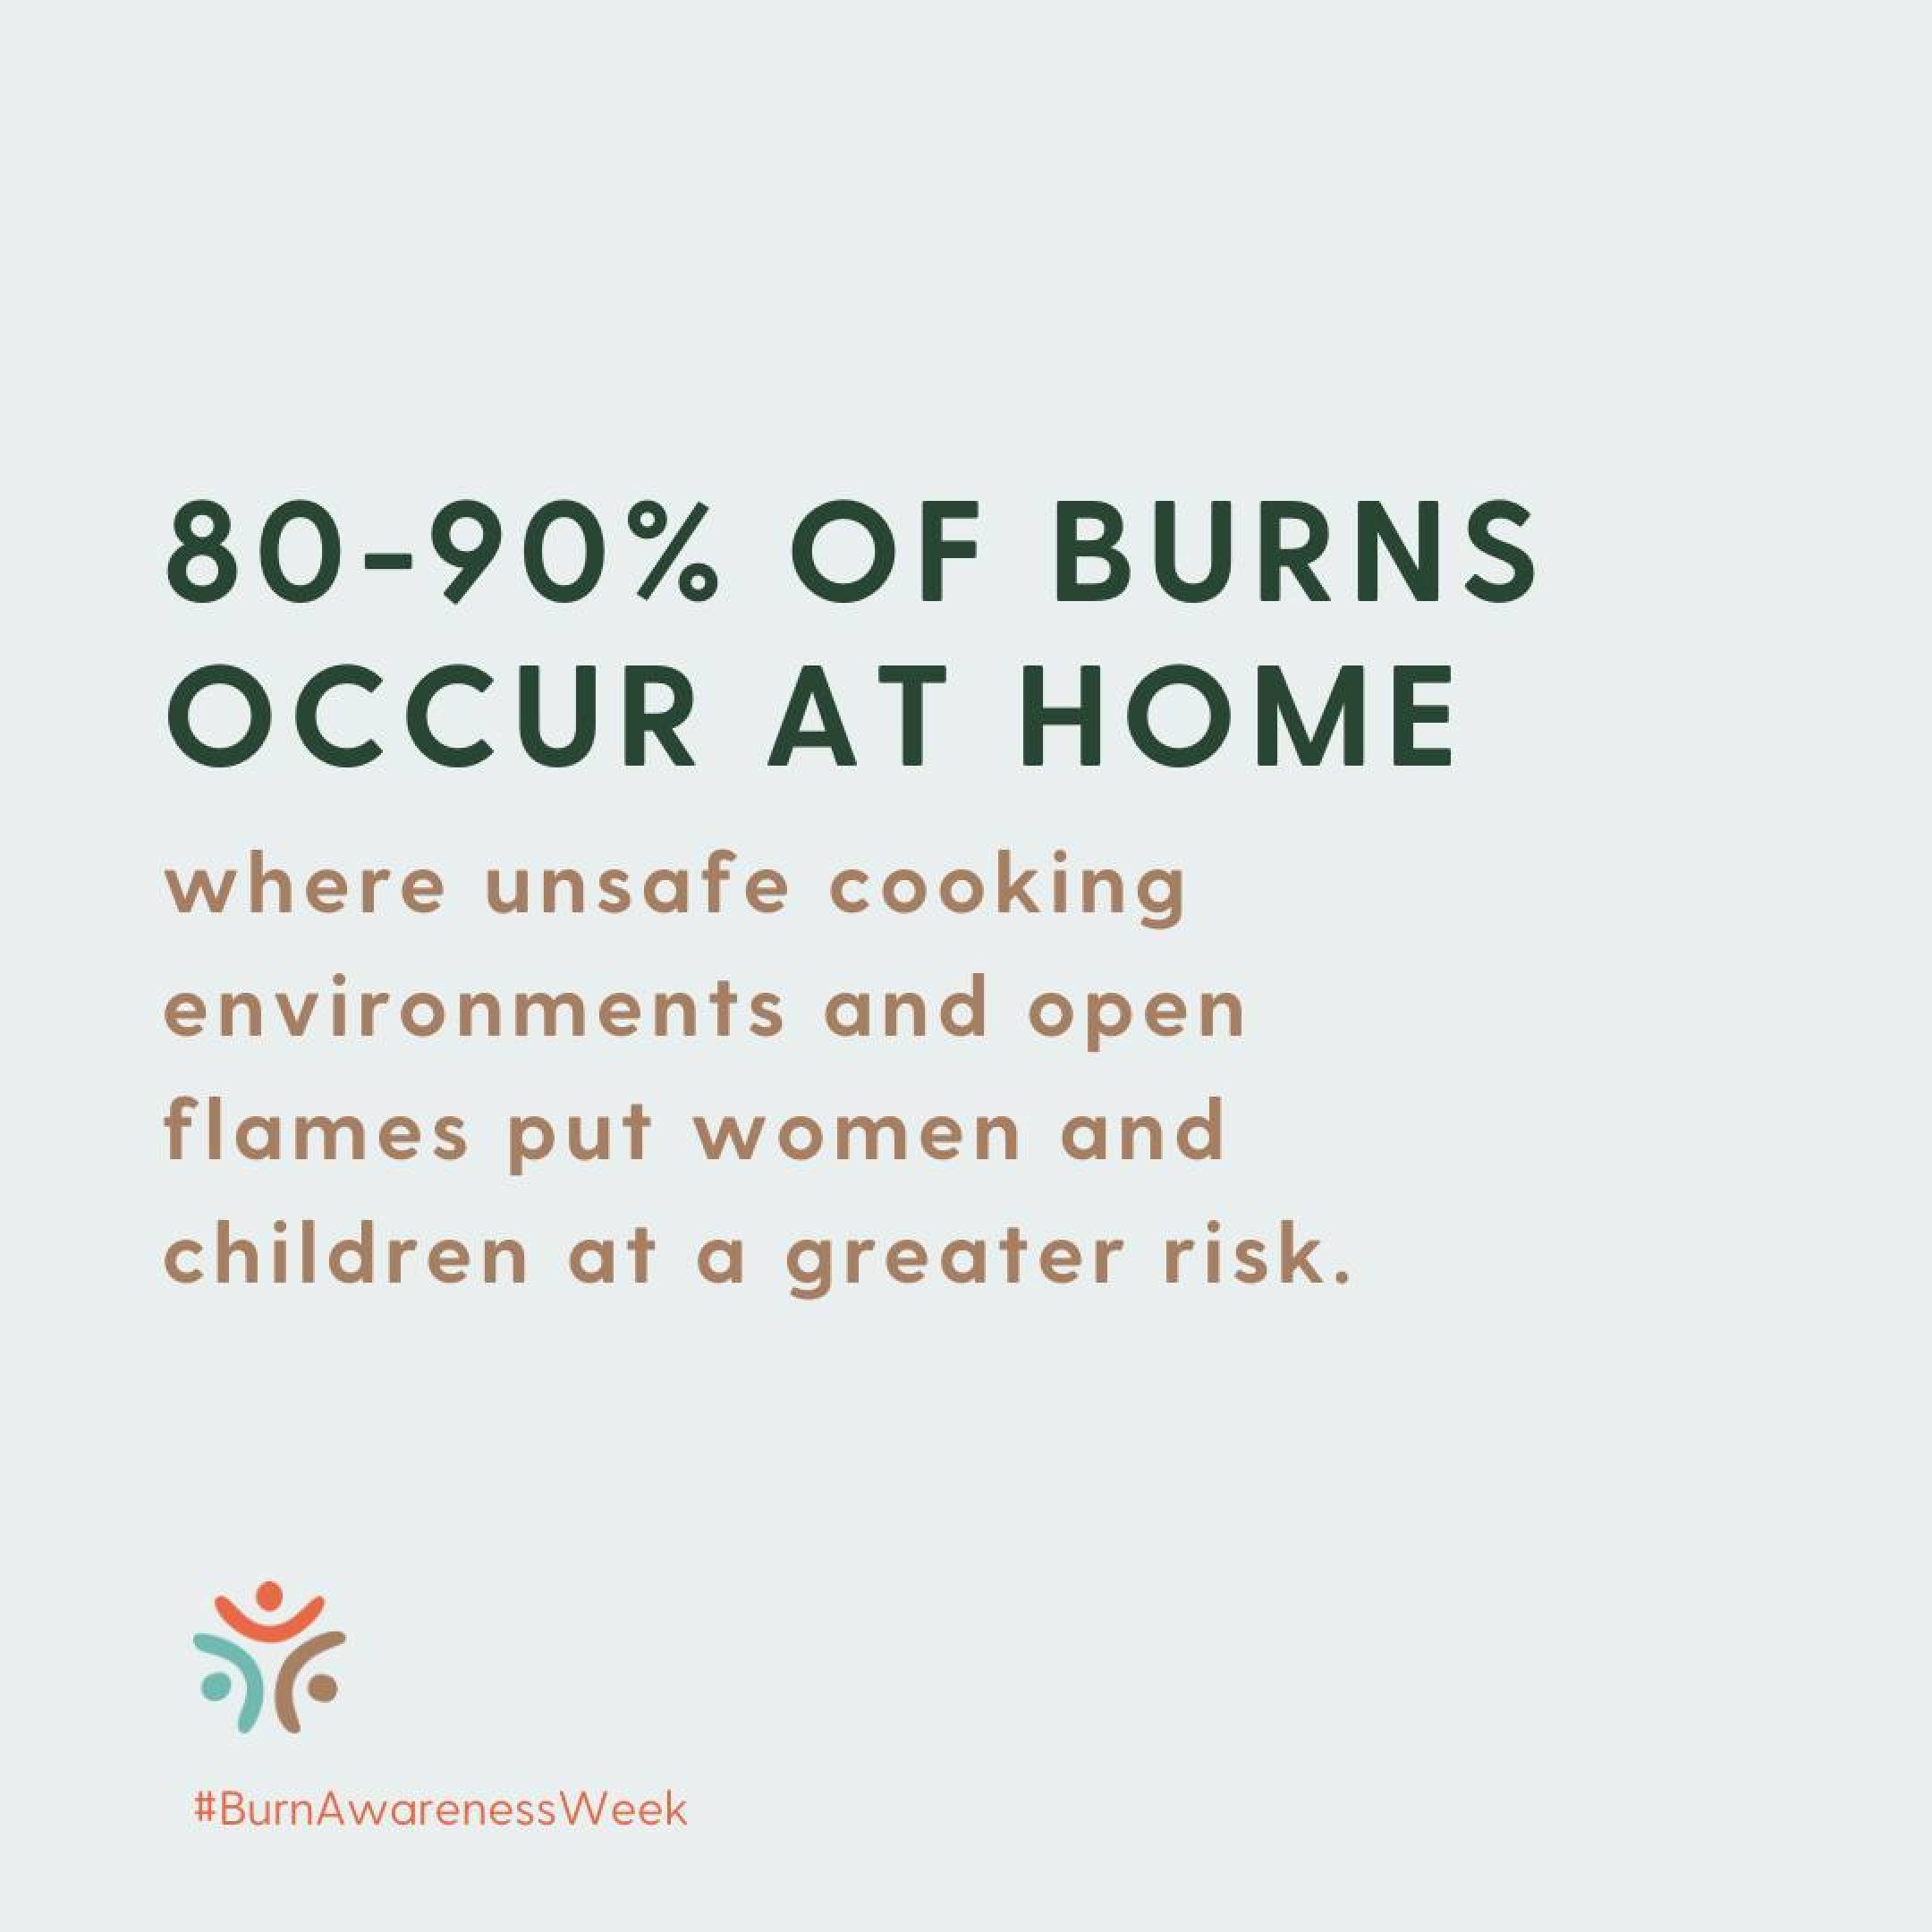 80-90% of burns occur at home where unsafe cooking environments and open flames put women and children at a greater risk